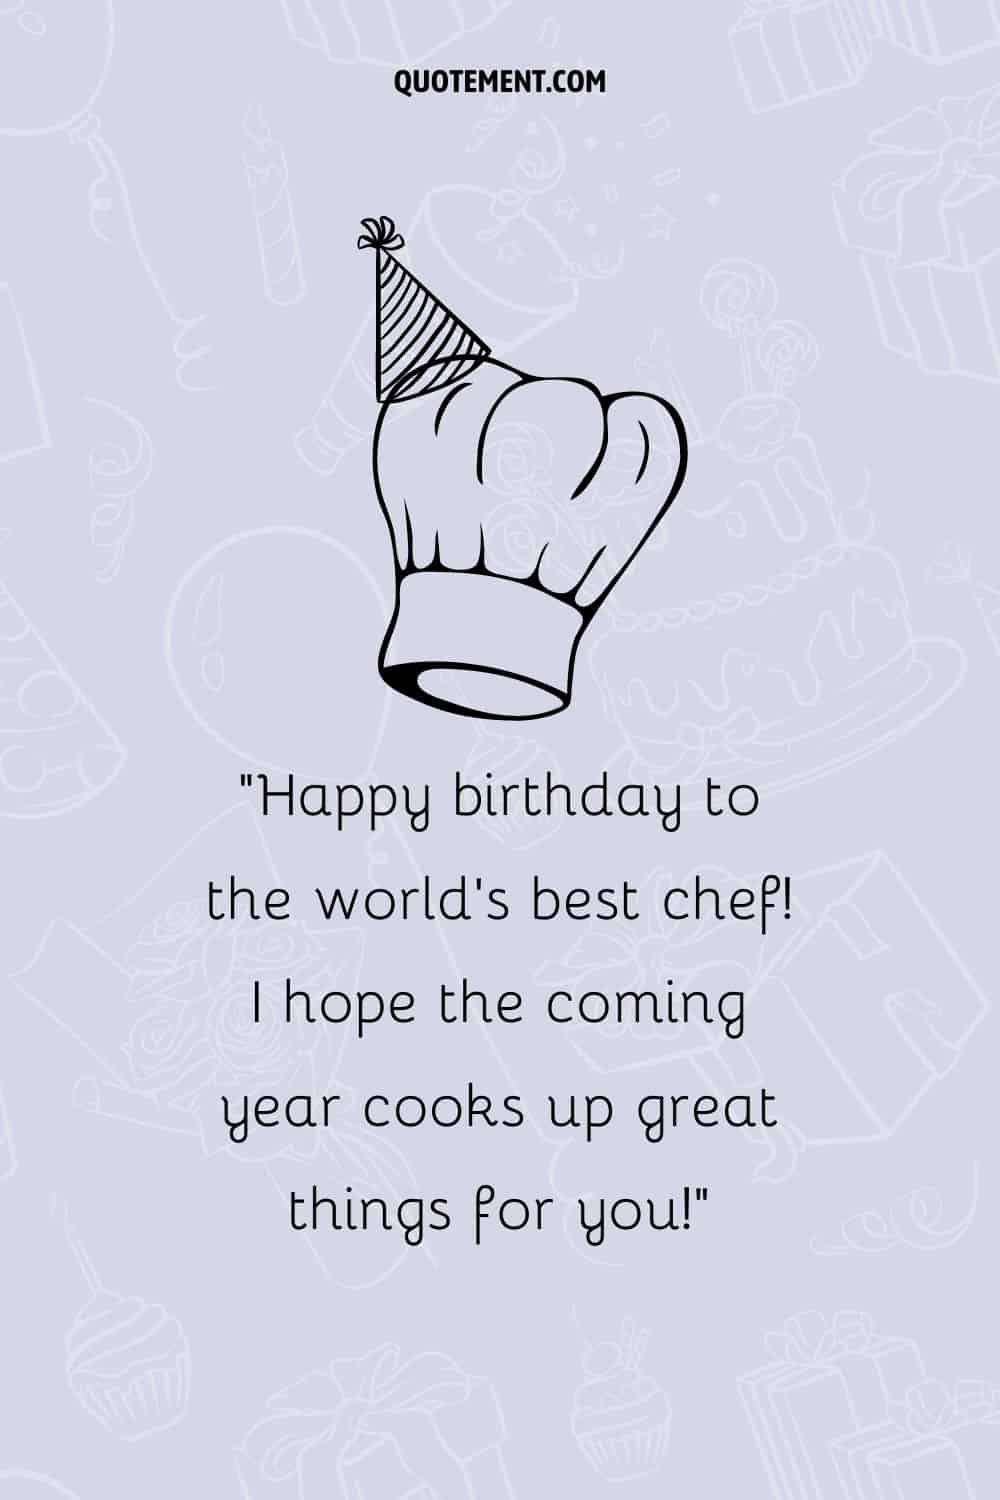 Chef's hat illustration representing a happy birthday to a chef wish.
